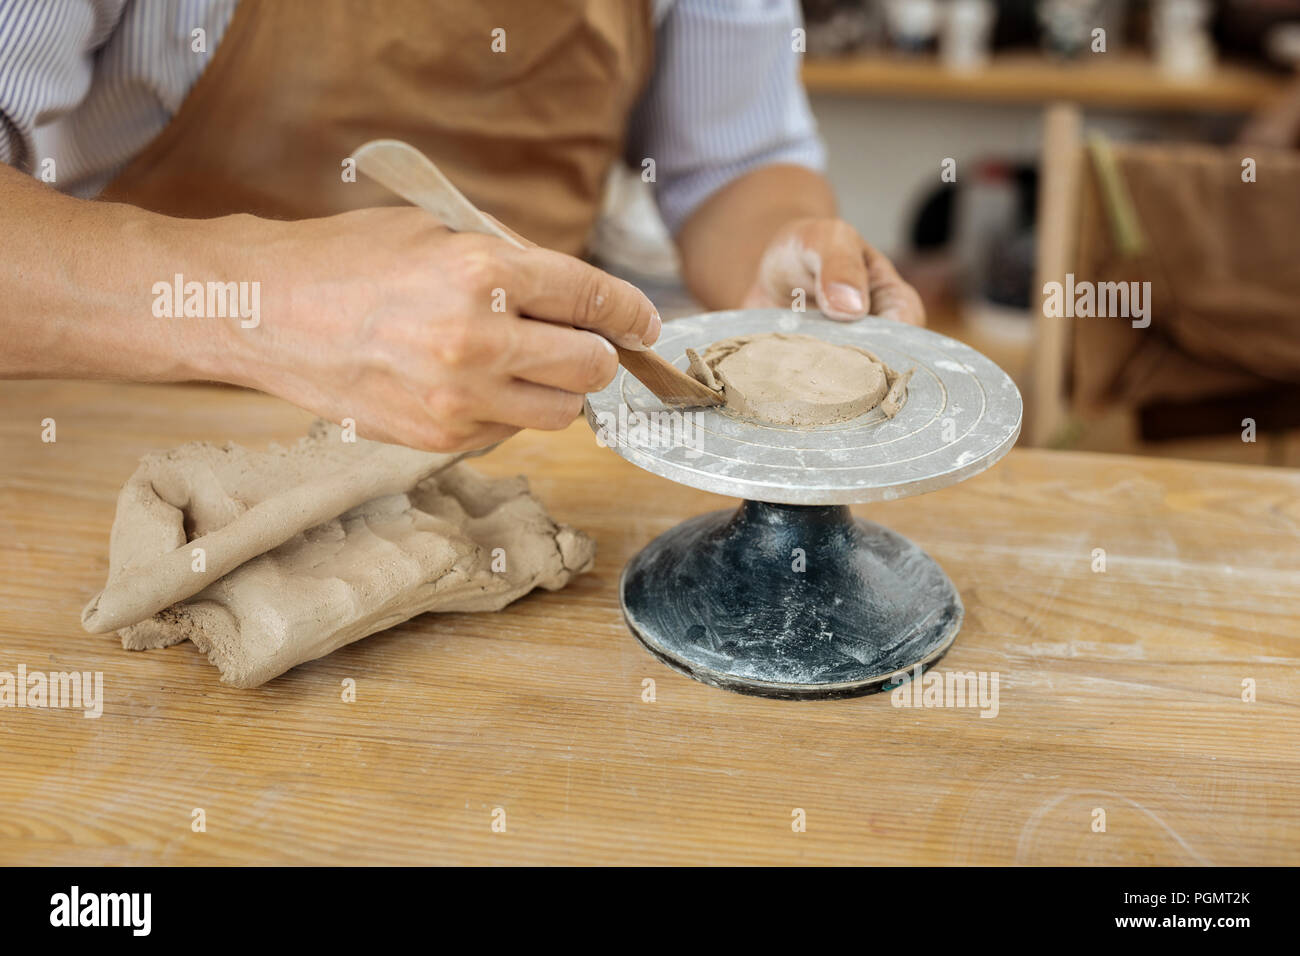 Handicraftsman wearing apron forming future clay items Stock Photo